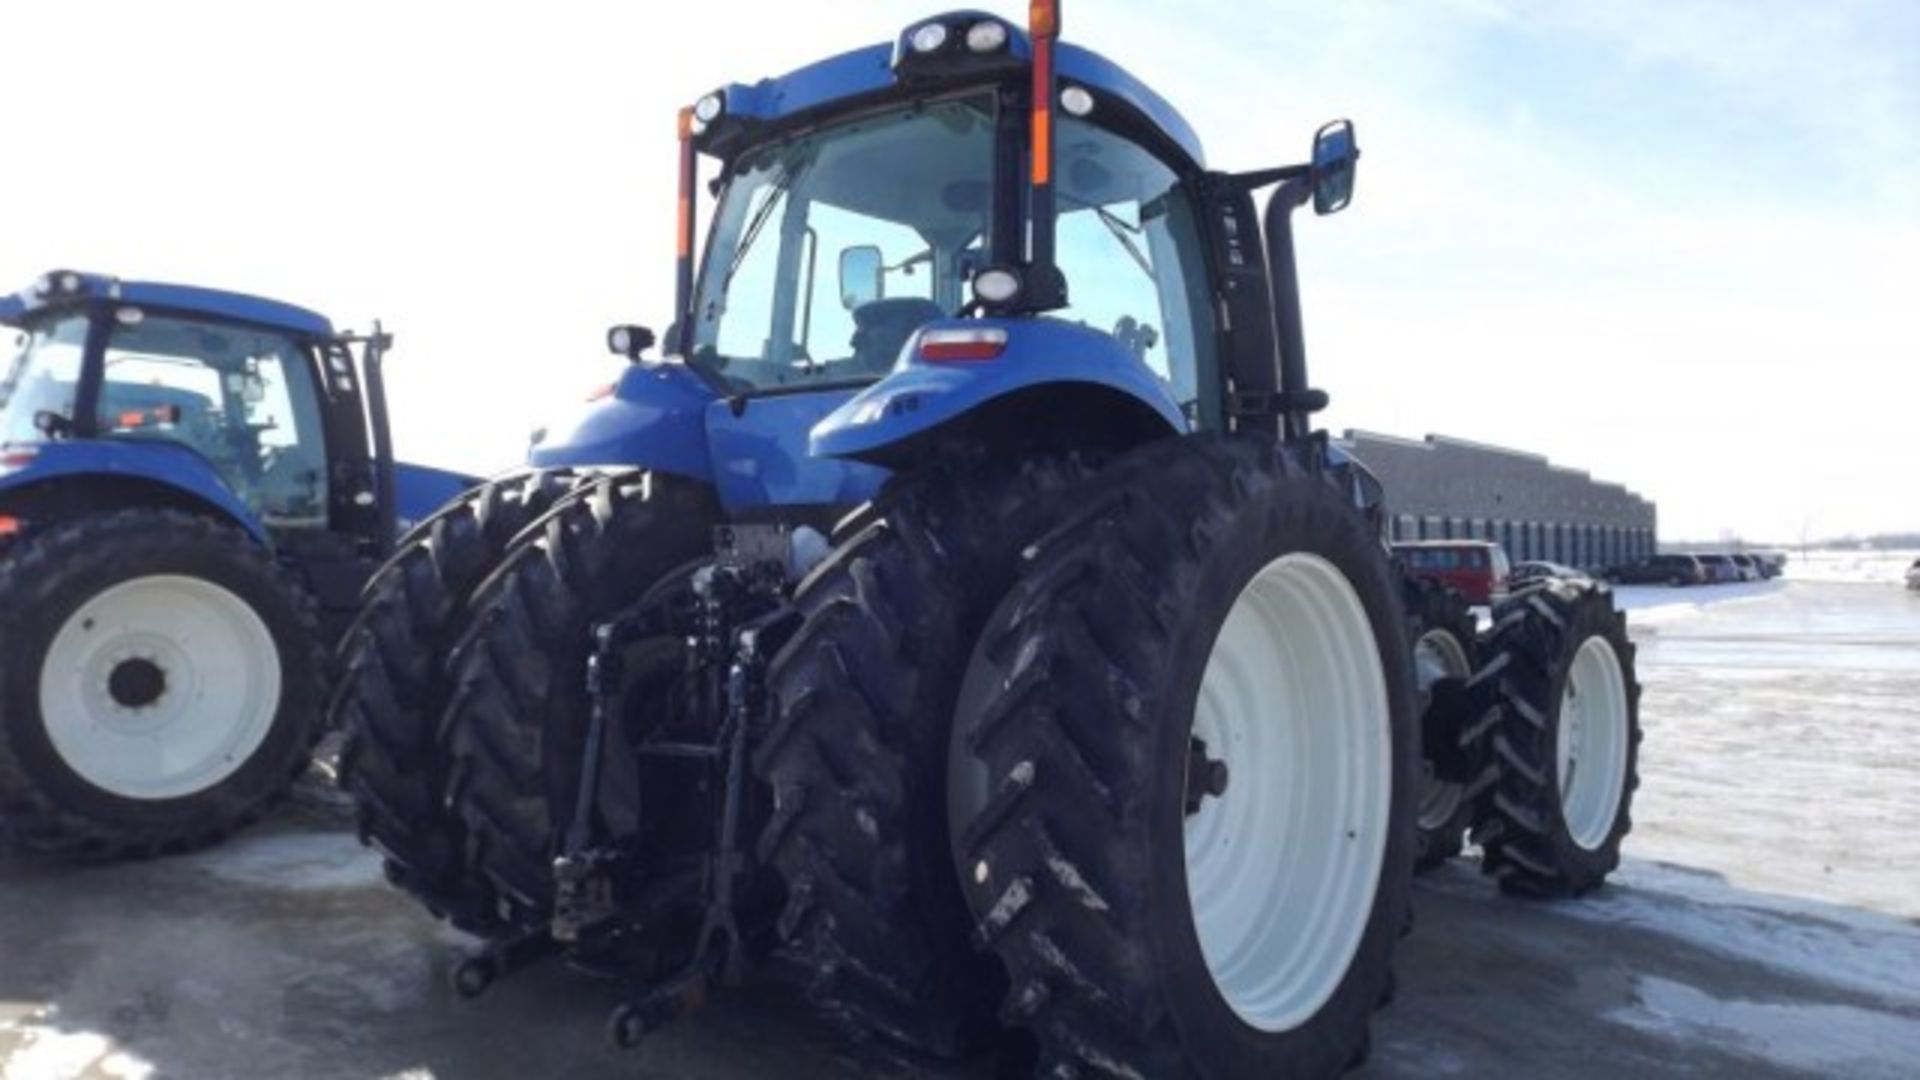 New Holland T8.330 Tractor '12, sn#ZBRC08592 1192 Hrs, MFWD, Deluxe Cab, Buddy Seat, 280 HP, 18/4 - Image 3 of 19